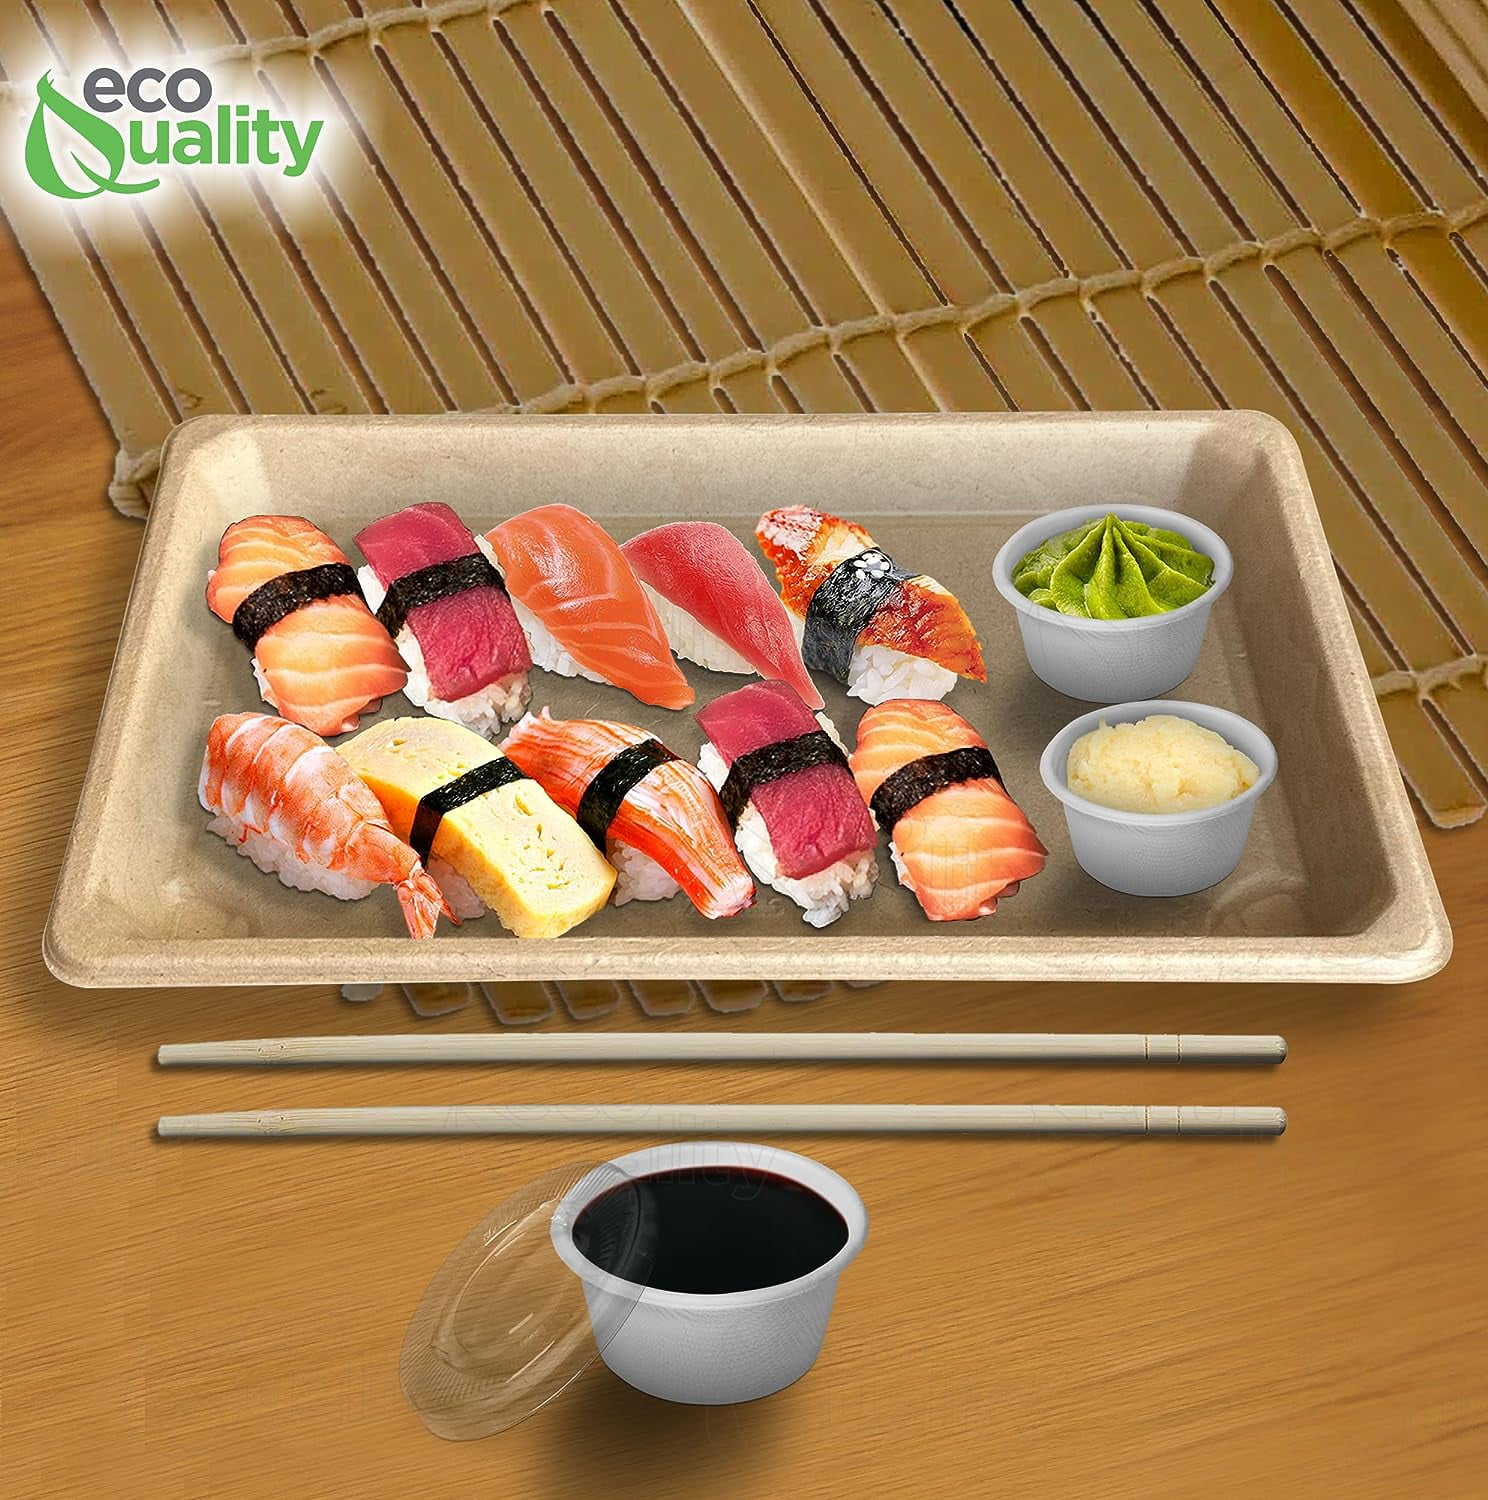 EcoQuality Small Compostable Sushi Trays with Lids - Natural  Sugarcane Bagasse Take Out Sushi Container - Biodegradable, Disposable Sushi  Plate with Lid, Eco Friendly, To go, Serving Tray (25): Sushi Plates